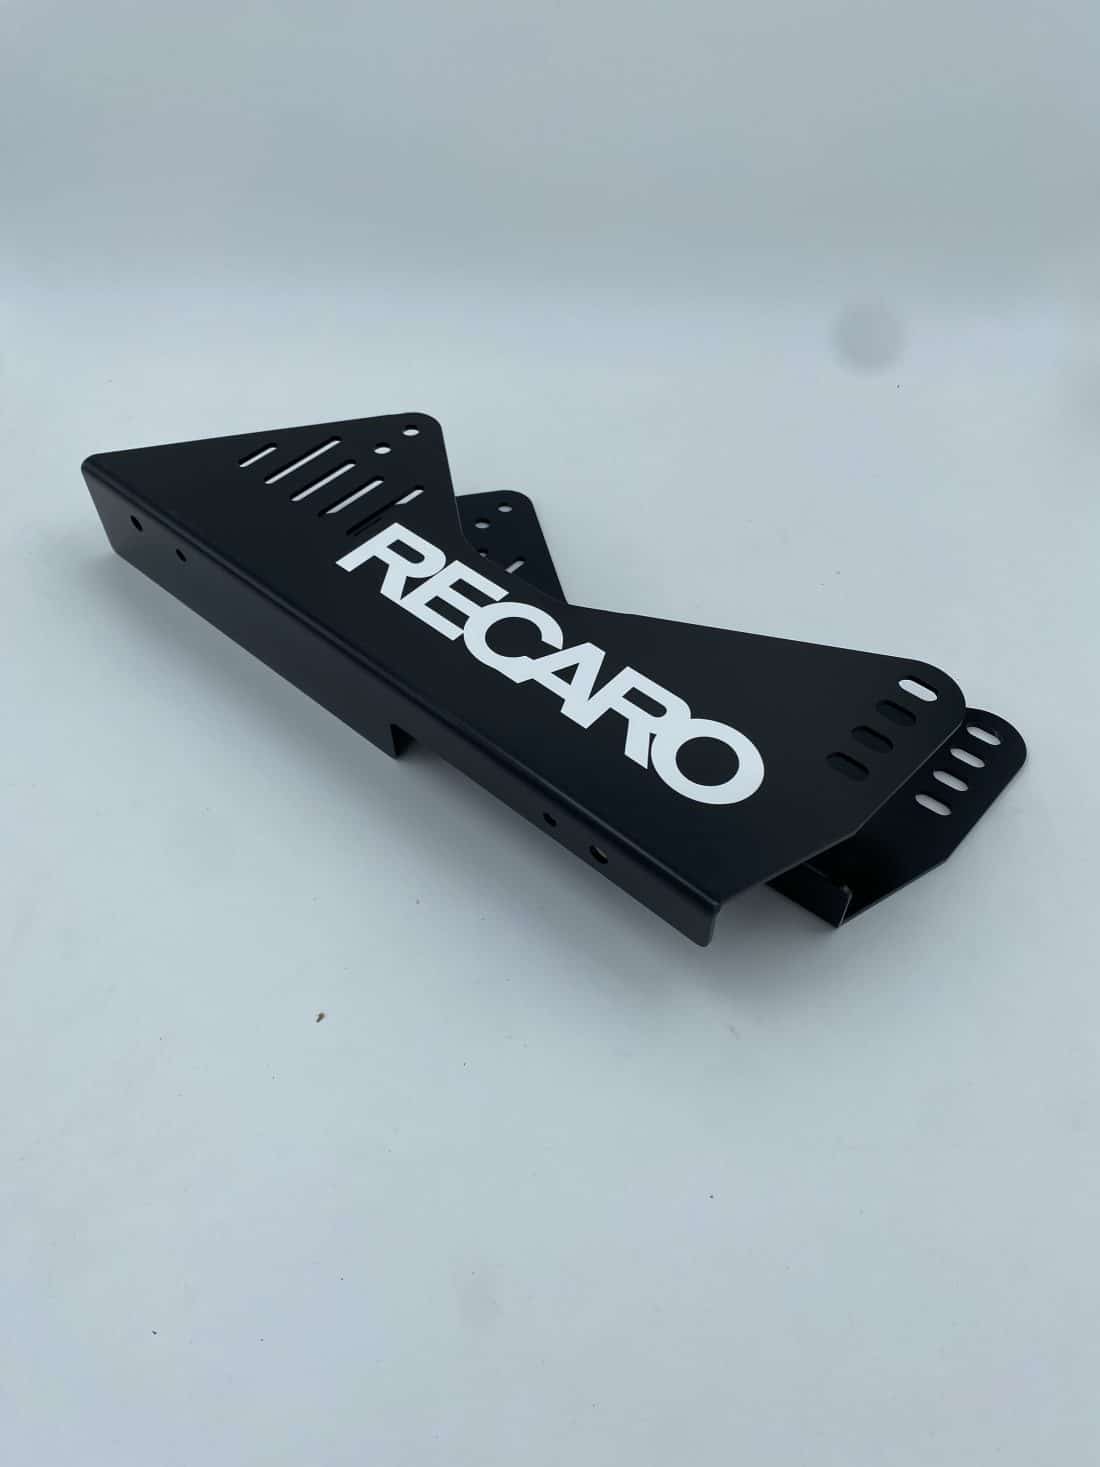 Trp Post Container Data Trp Post Id 13015 Recaro Steel Adapter 7207450a Trp Post Container